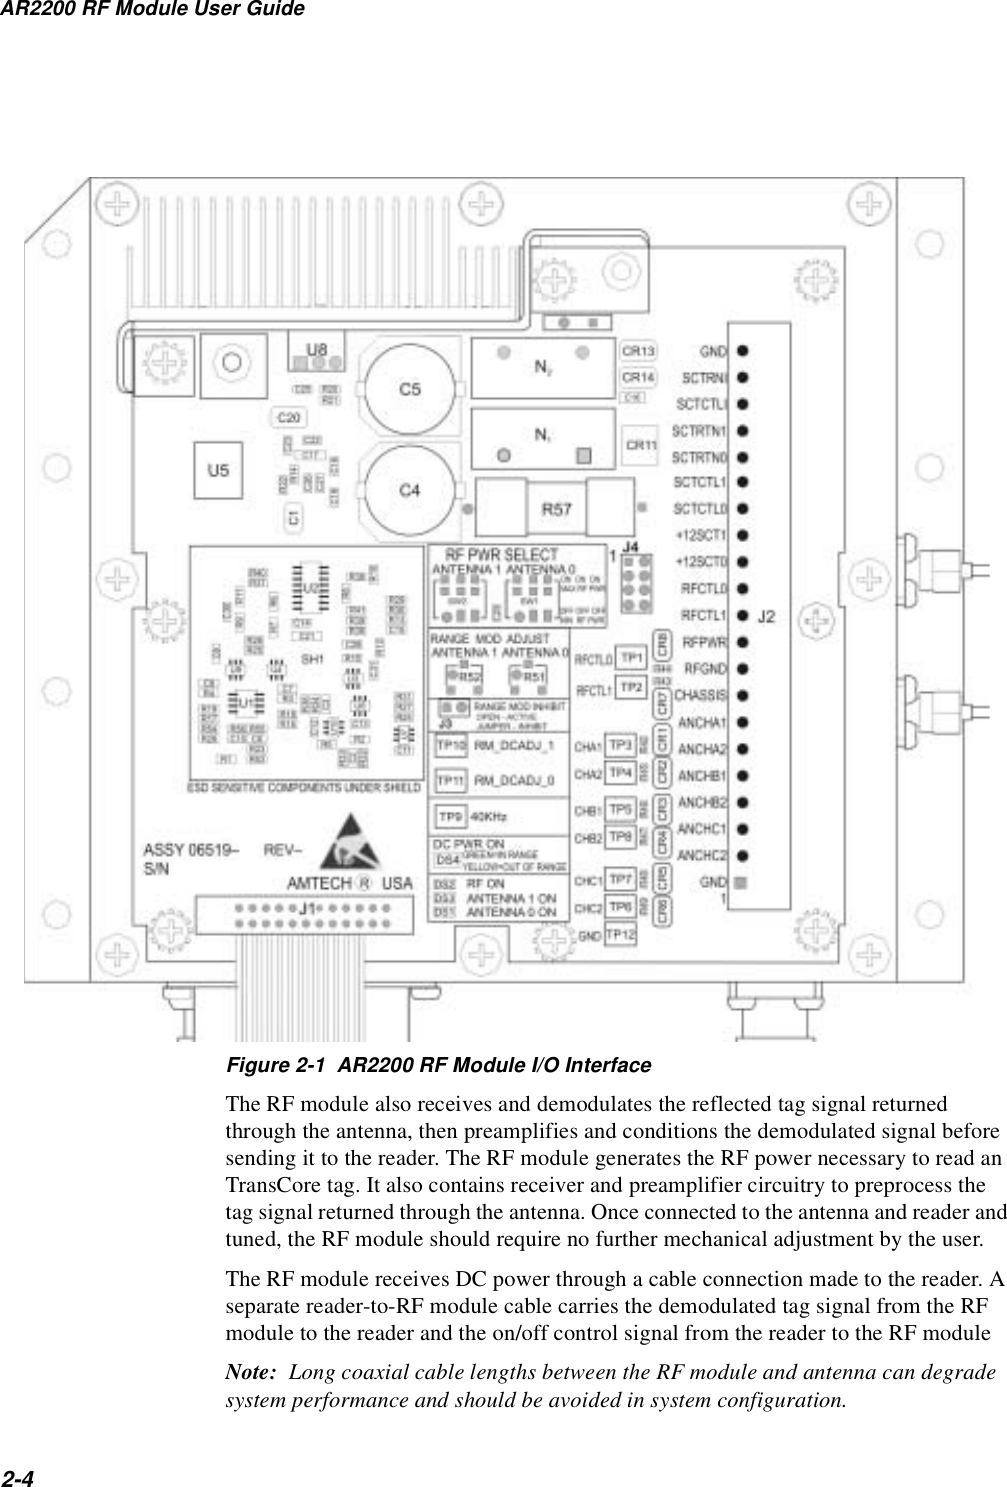 AR2200 RF Module User Guide2-4Figure 2-1  AR2200 RF Module I/O InterfaceThe RF module also receives and demodulates the reflected tag signal returned through the antenna, then preamplifies and conditions the demodulated signal before sending it to the reader. The RF module generates the RF power necessary to read an TransCore tag. It also contains receiver and preamplifier circuitry to preprocess the tag signal returned through the antenna. Once connected to the antenna and reader and tuned, the RF module should require no further mechanical adjustment by the user.The RF module receives DC power through a cable connection made to the reader. A separate reader-to-RF module cable carries the demodulated tag signal from the RF module to the reader and the on/off control signal from the reader to the RF moduleNote:  Long coaxial cable lengths between the RF module and antenna can degrade system performance and should be avoided in system configuration.